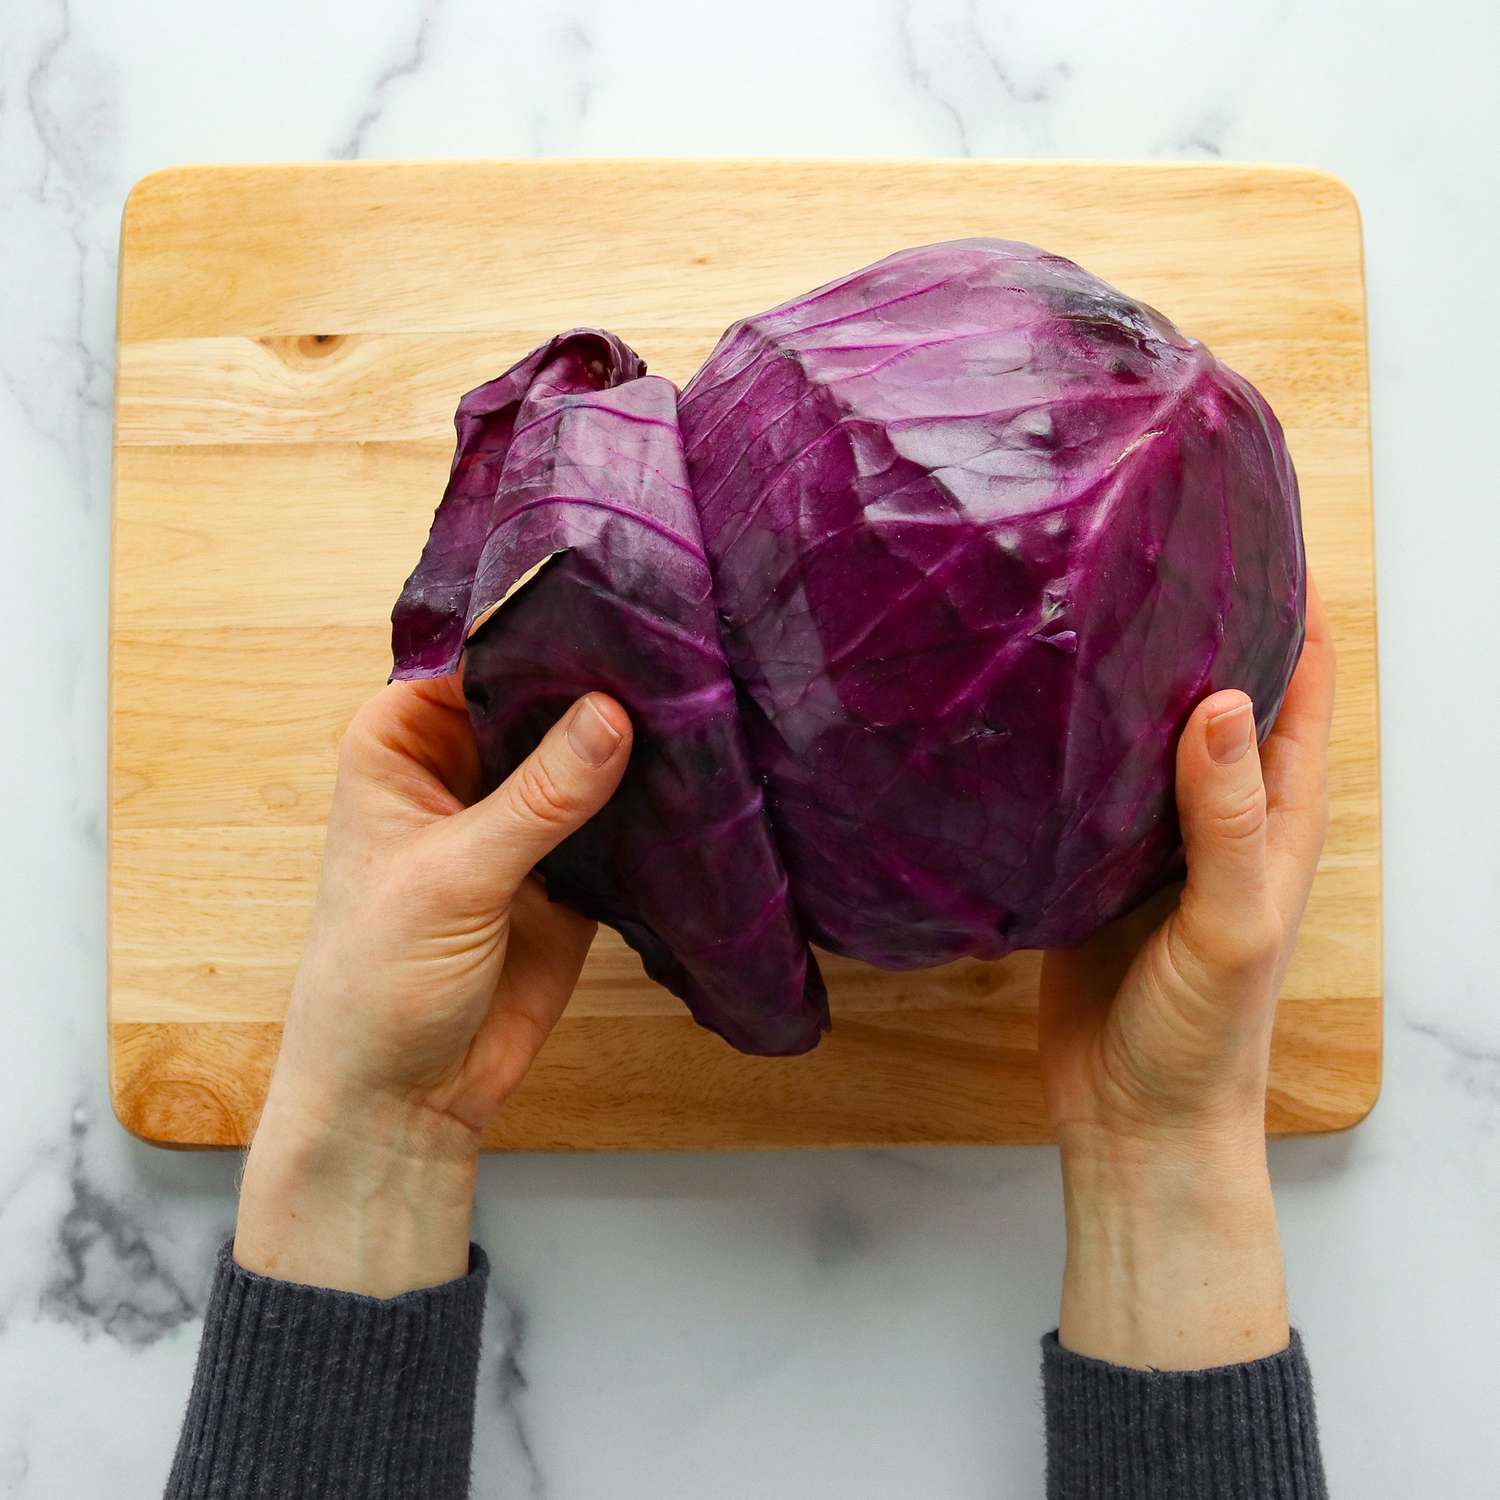 Hands peeling leaves off a head of purple cabbage